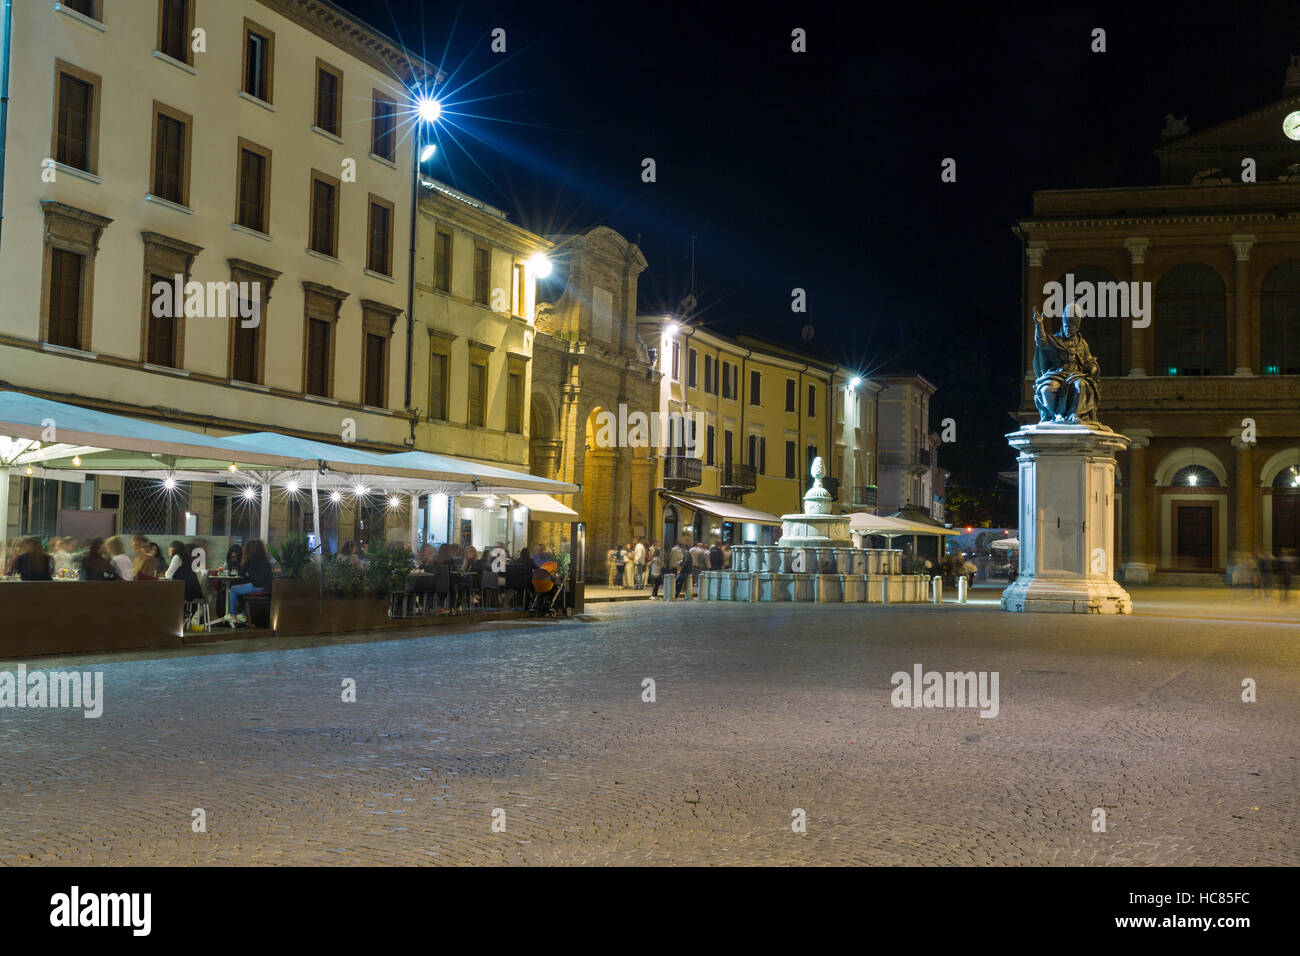 Cavour square with statue of Pope Paul V, Pigna fountain and public theater Amintore Galli at night in Rimini, Italy. Stock Photo